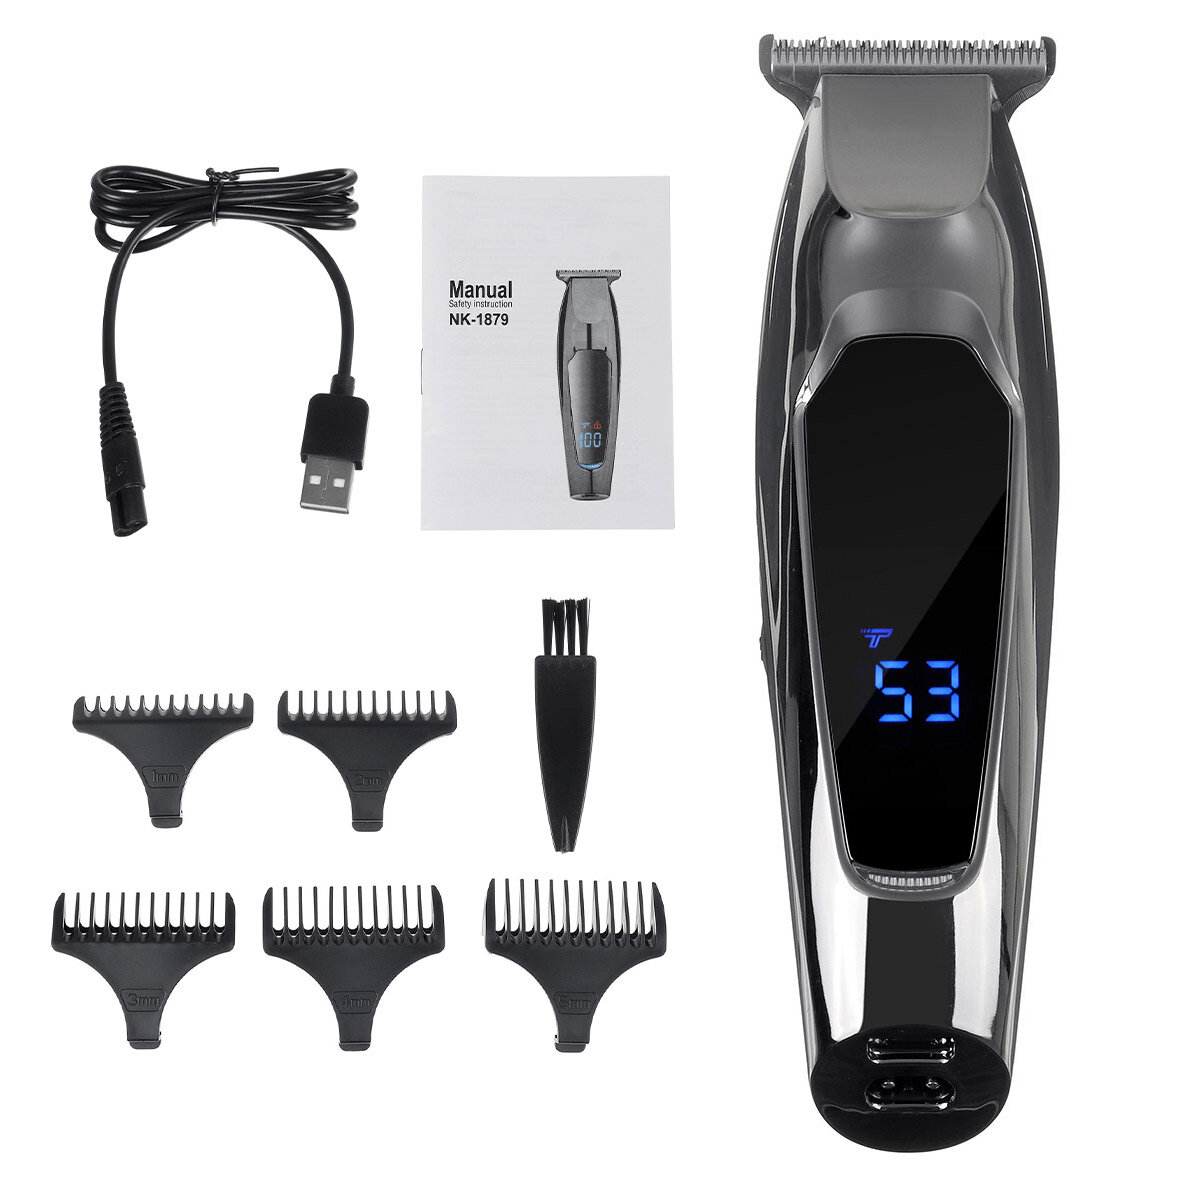 

1000mA Display USB Rechargable Hair Clipper 2 Speed Electric Hair Trimmer Shaver Haircut Barber Tool